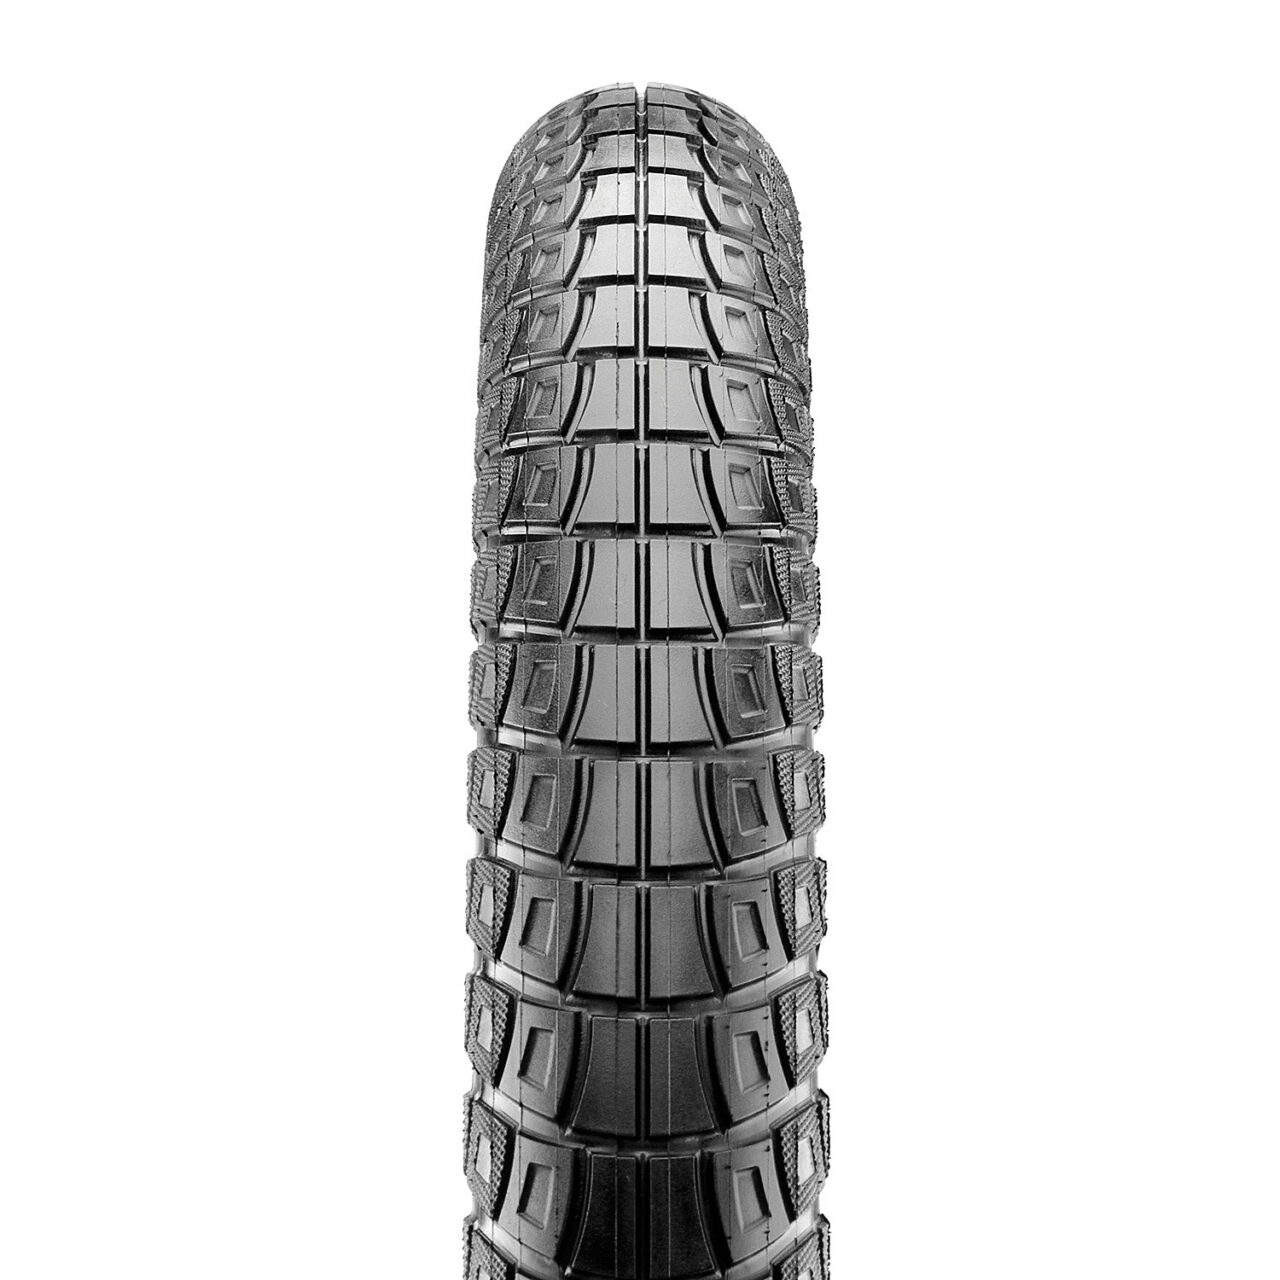 Maxxis Rizer bicycle tire tread